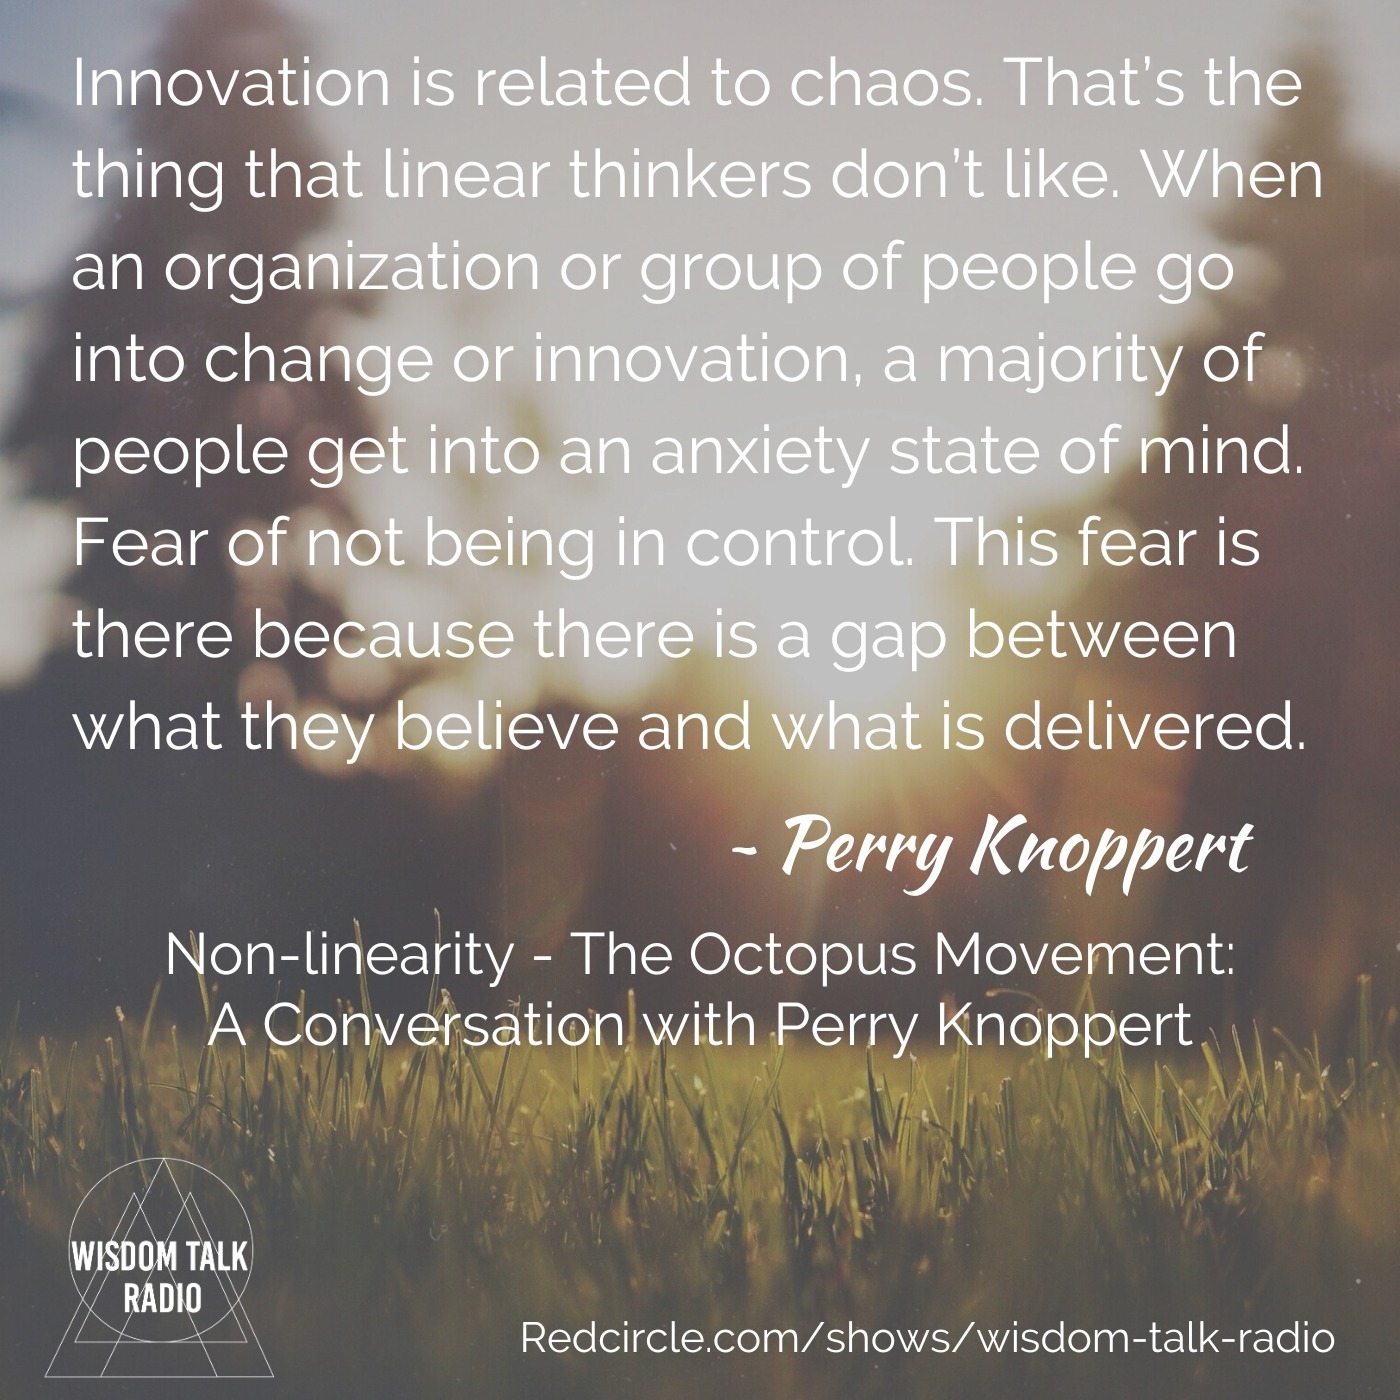 Nonlinearity and The Octopus Movement: a Conversation with Perry Knoppert